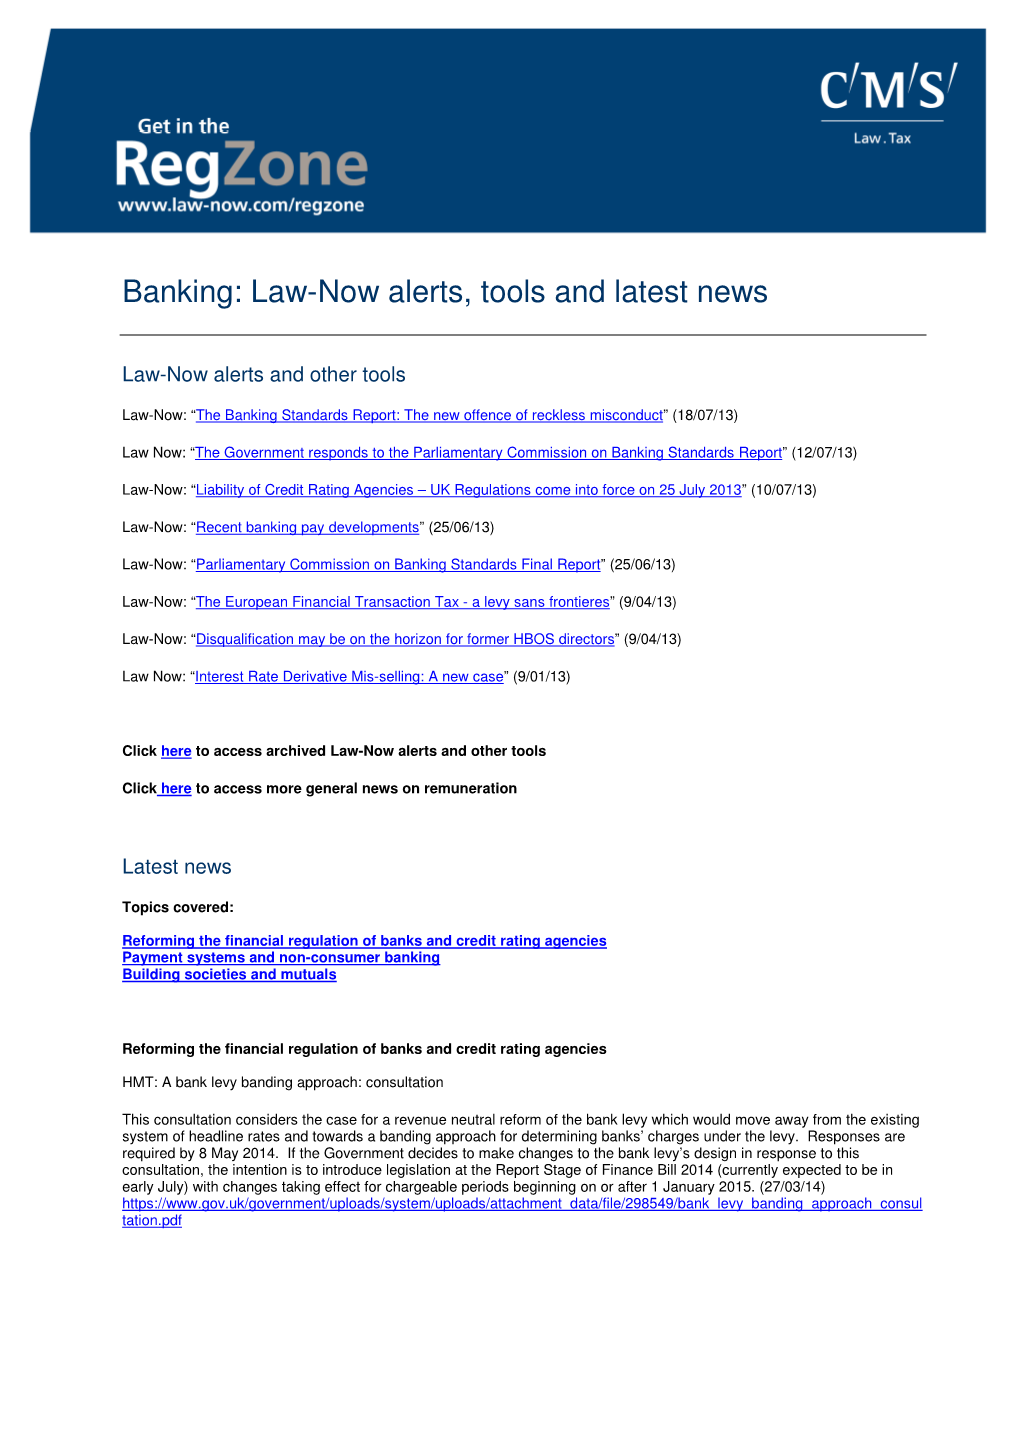 Banking: Law-Now Alerts, Tools and Latest News